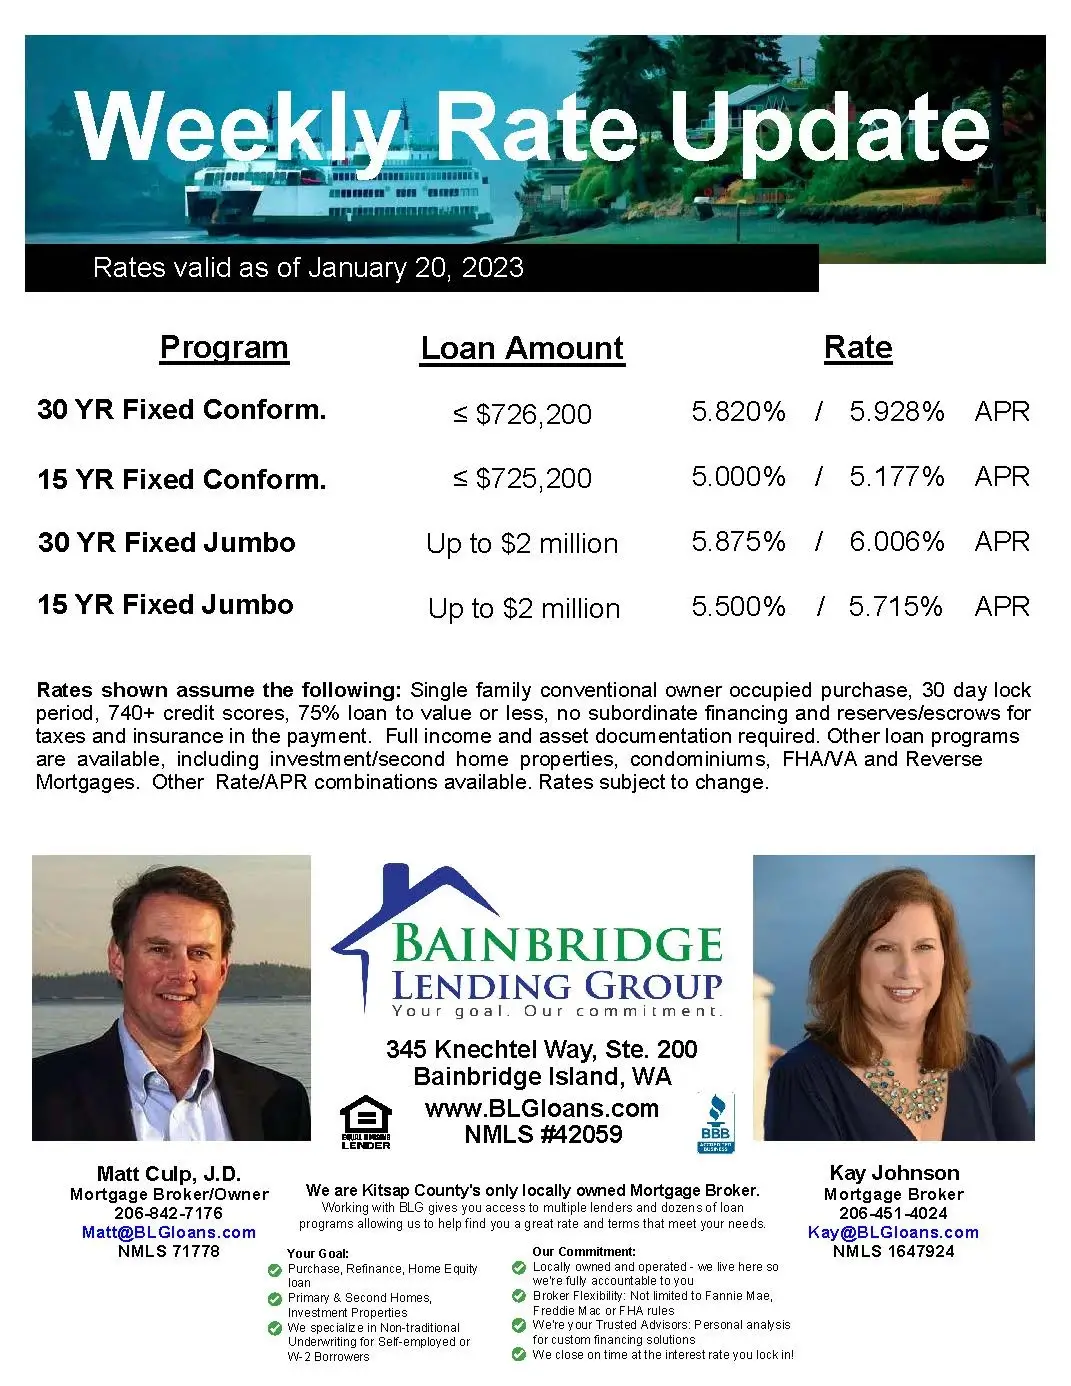 Weekly Rate Update for January 20, 2023